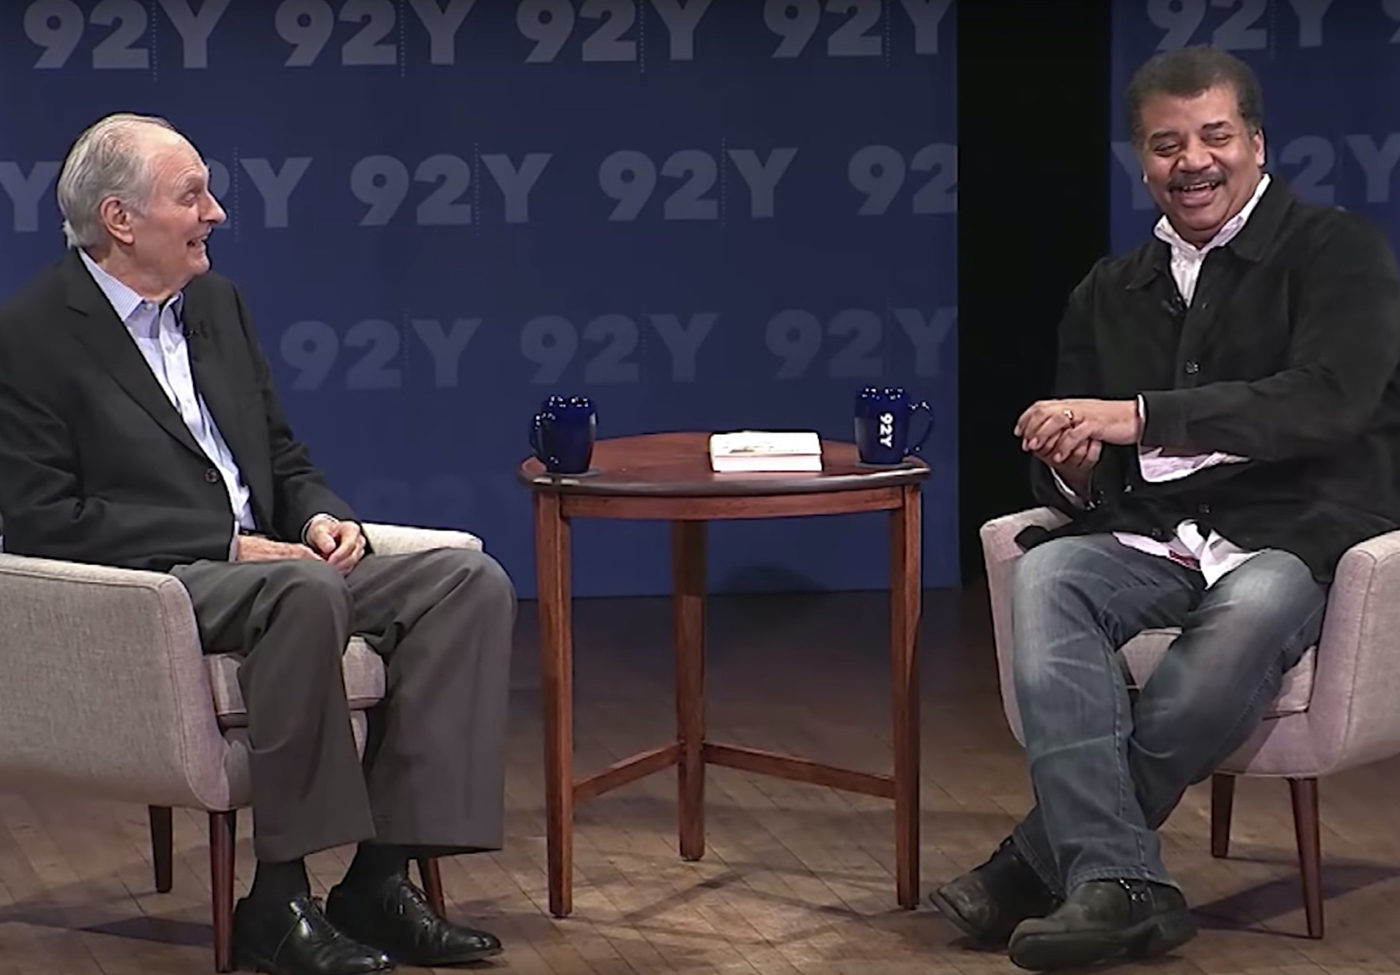 Photo of Alan Alda and Neil deGrasse Tyson at the 92nd St. Y in NYC. Credit: © 2018 92nd Street Young Men's and Young Women's Hebrew Association.